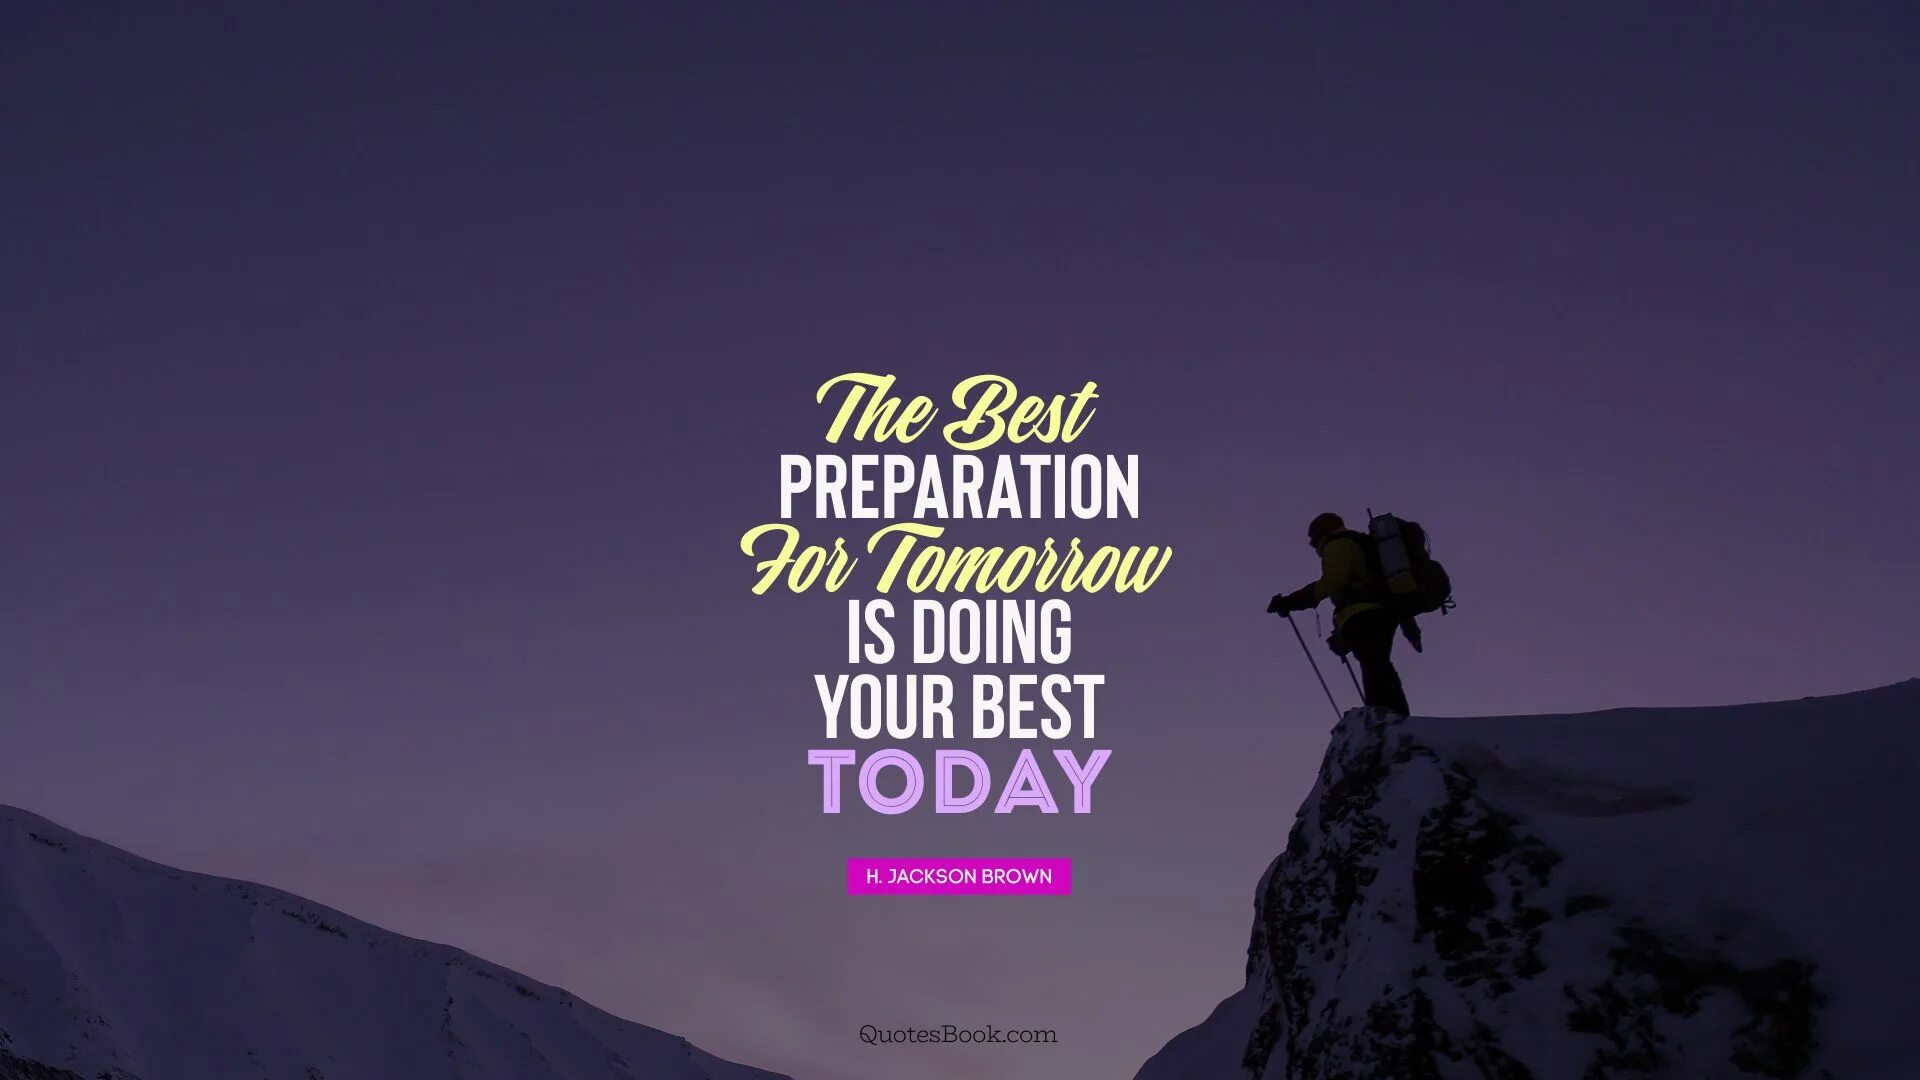 You can prepare better. The best preparation for tomorrow is doing your best today. Doing your best. Today quote. Today is the best высказывание.